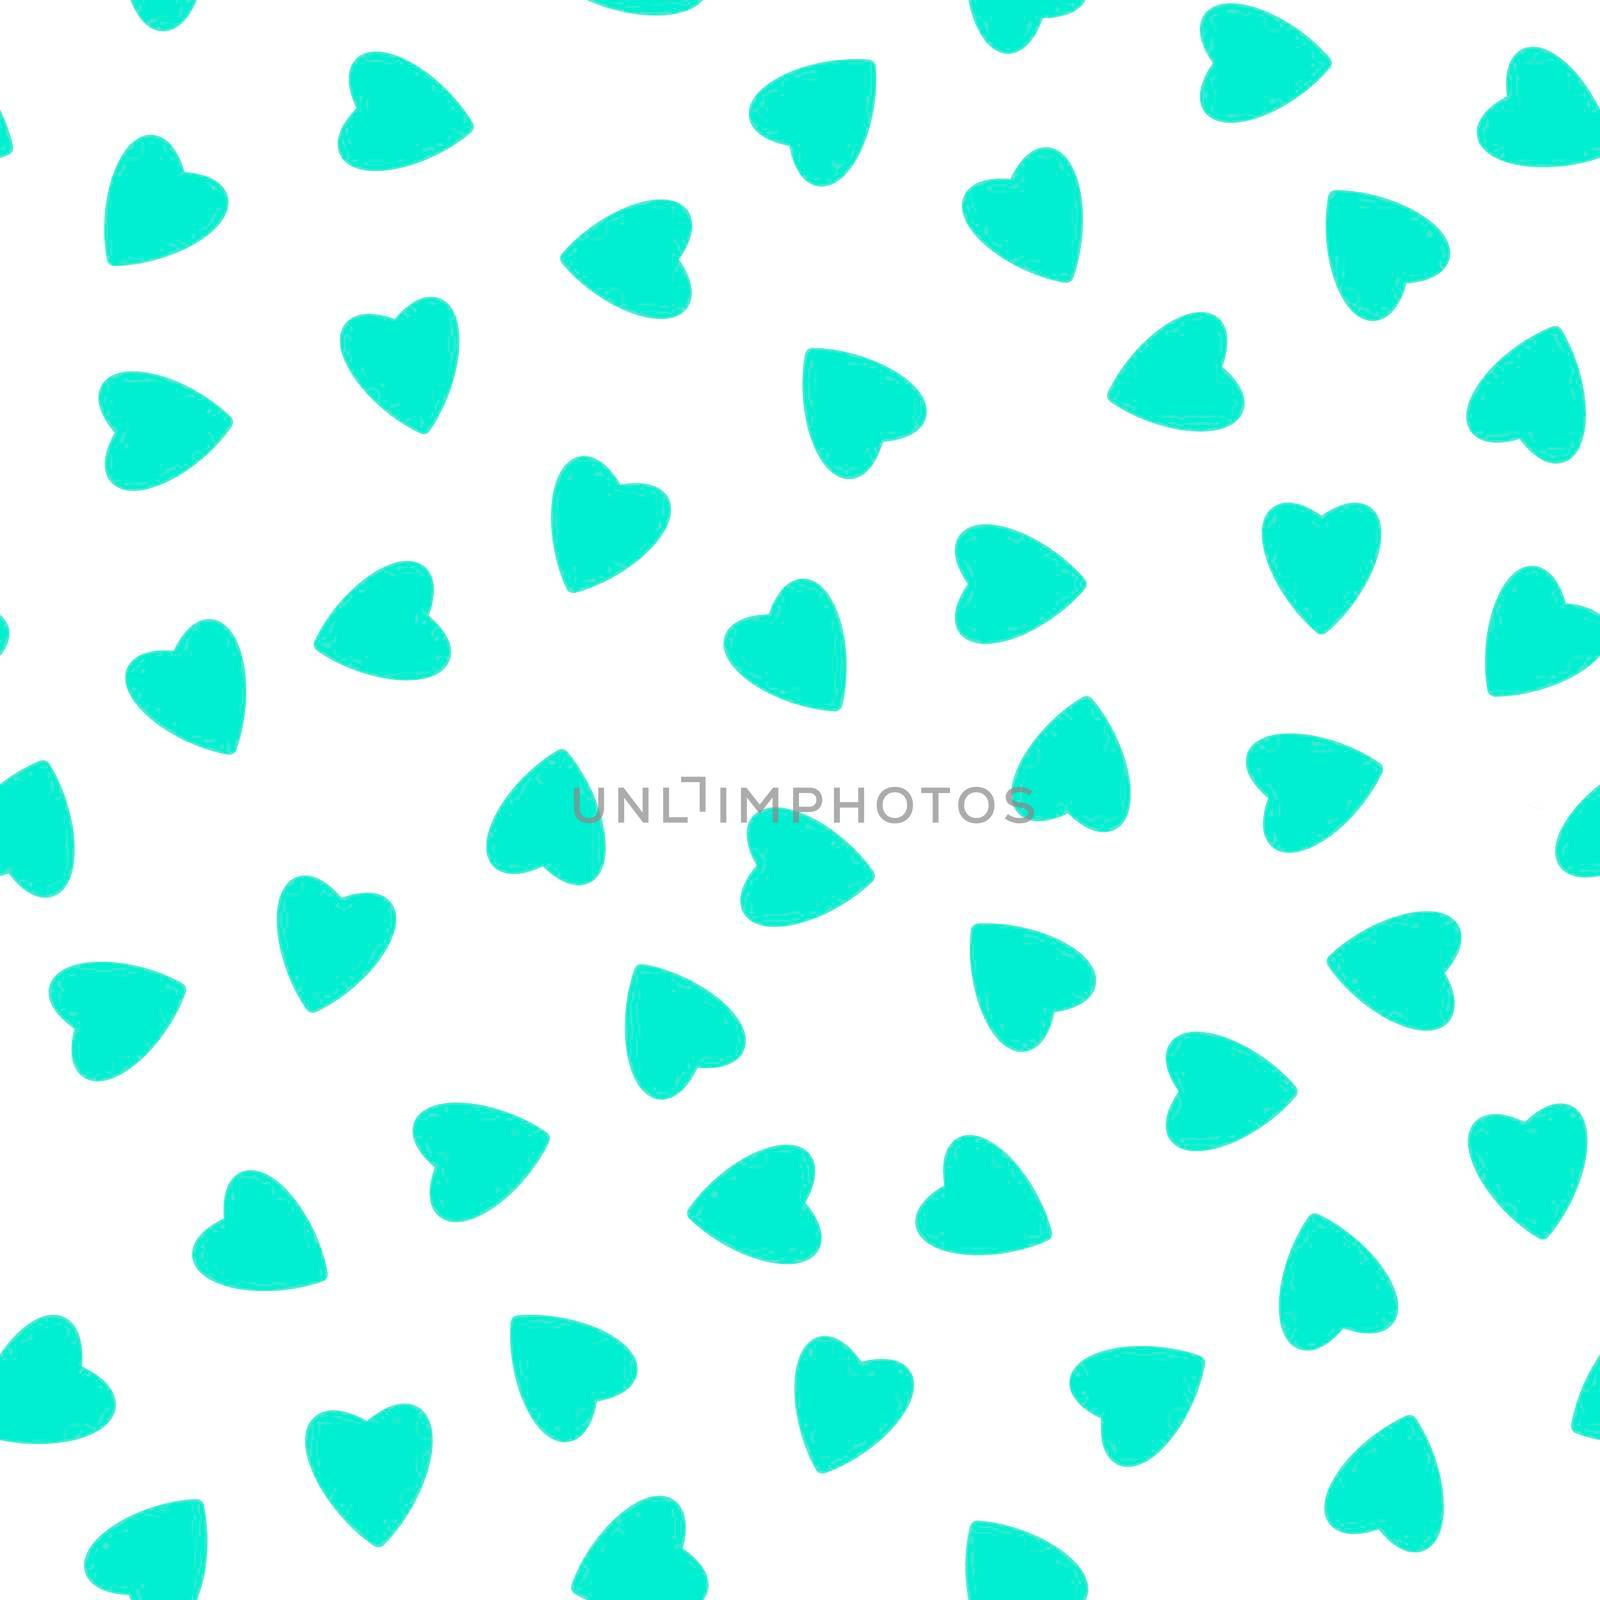 Simple hearts seamless pattern,endless chaotic texture made of tiny heart silhouettes.Valentines,mothers day background.Great for Easter,wedding,scrapbook,gift wrapping paper,textiles.Azure on white by Angelsmoon